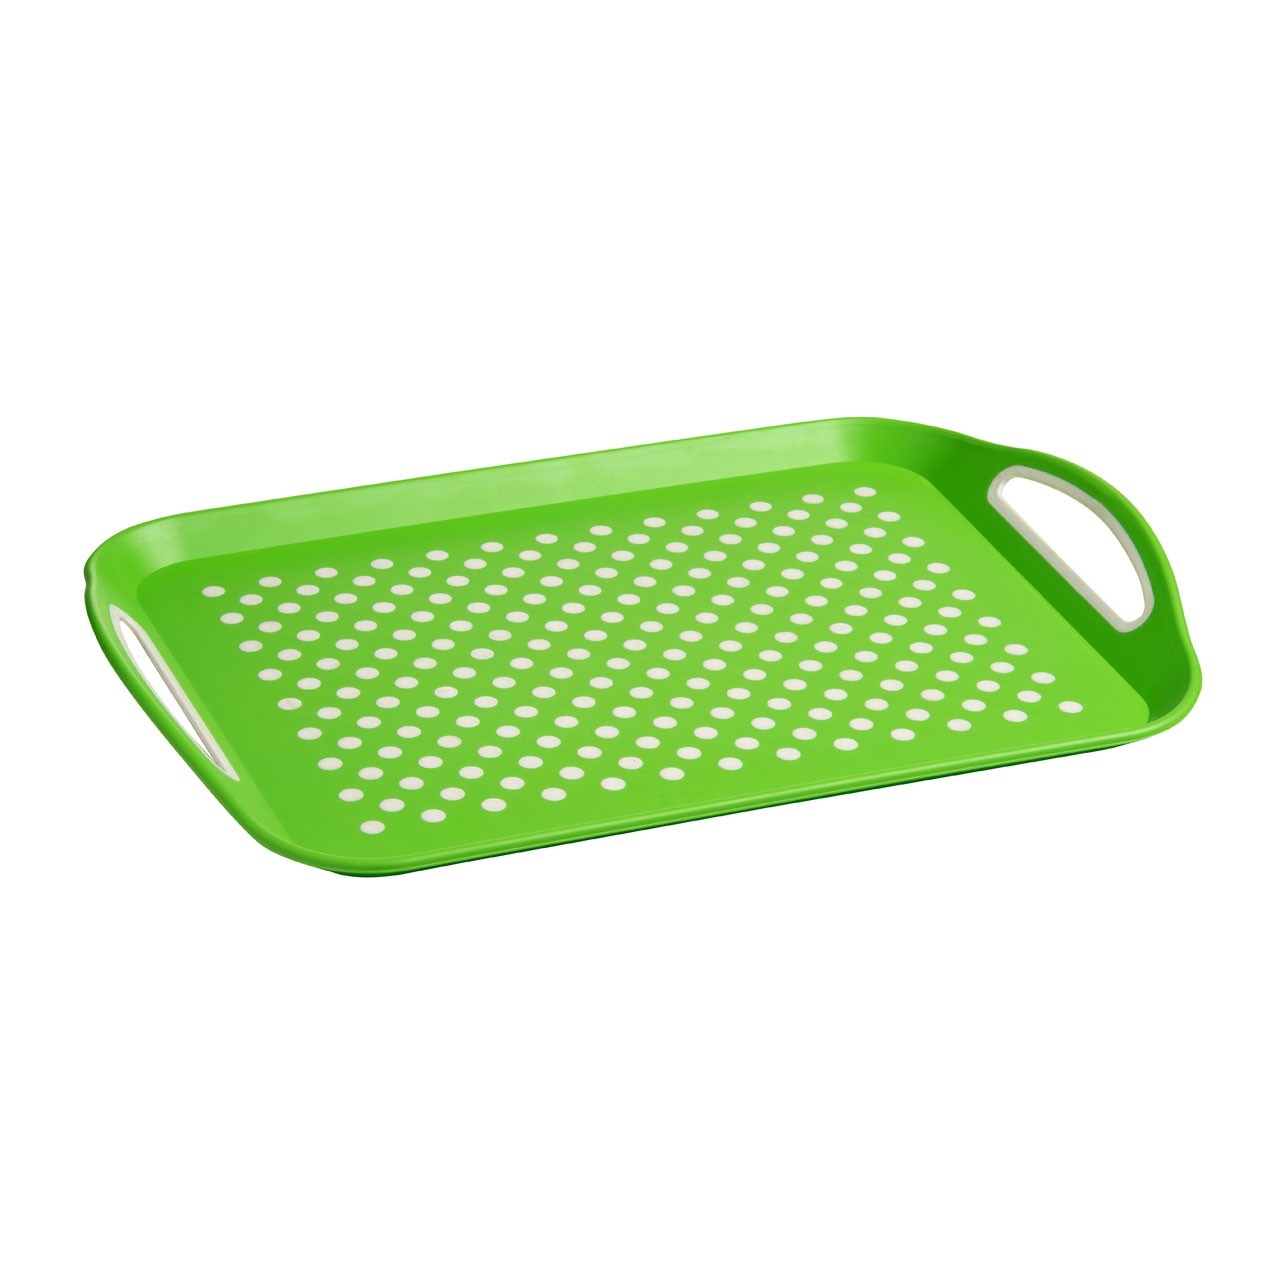 Anti-Slip Serving Tray PP & Tpe Green With White Dots